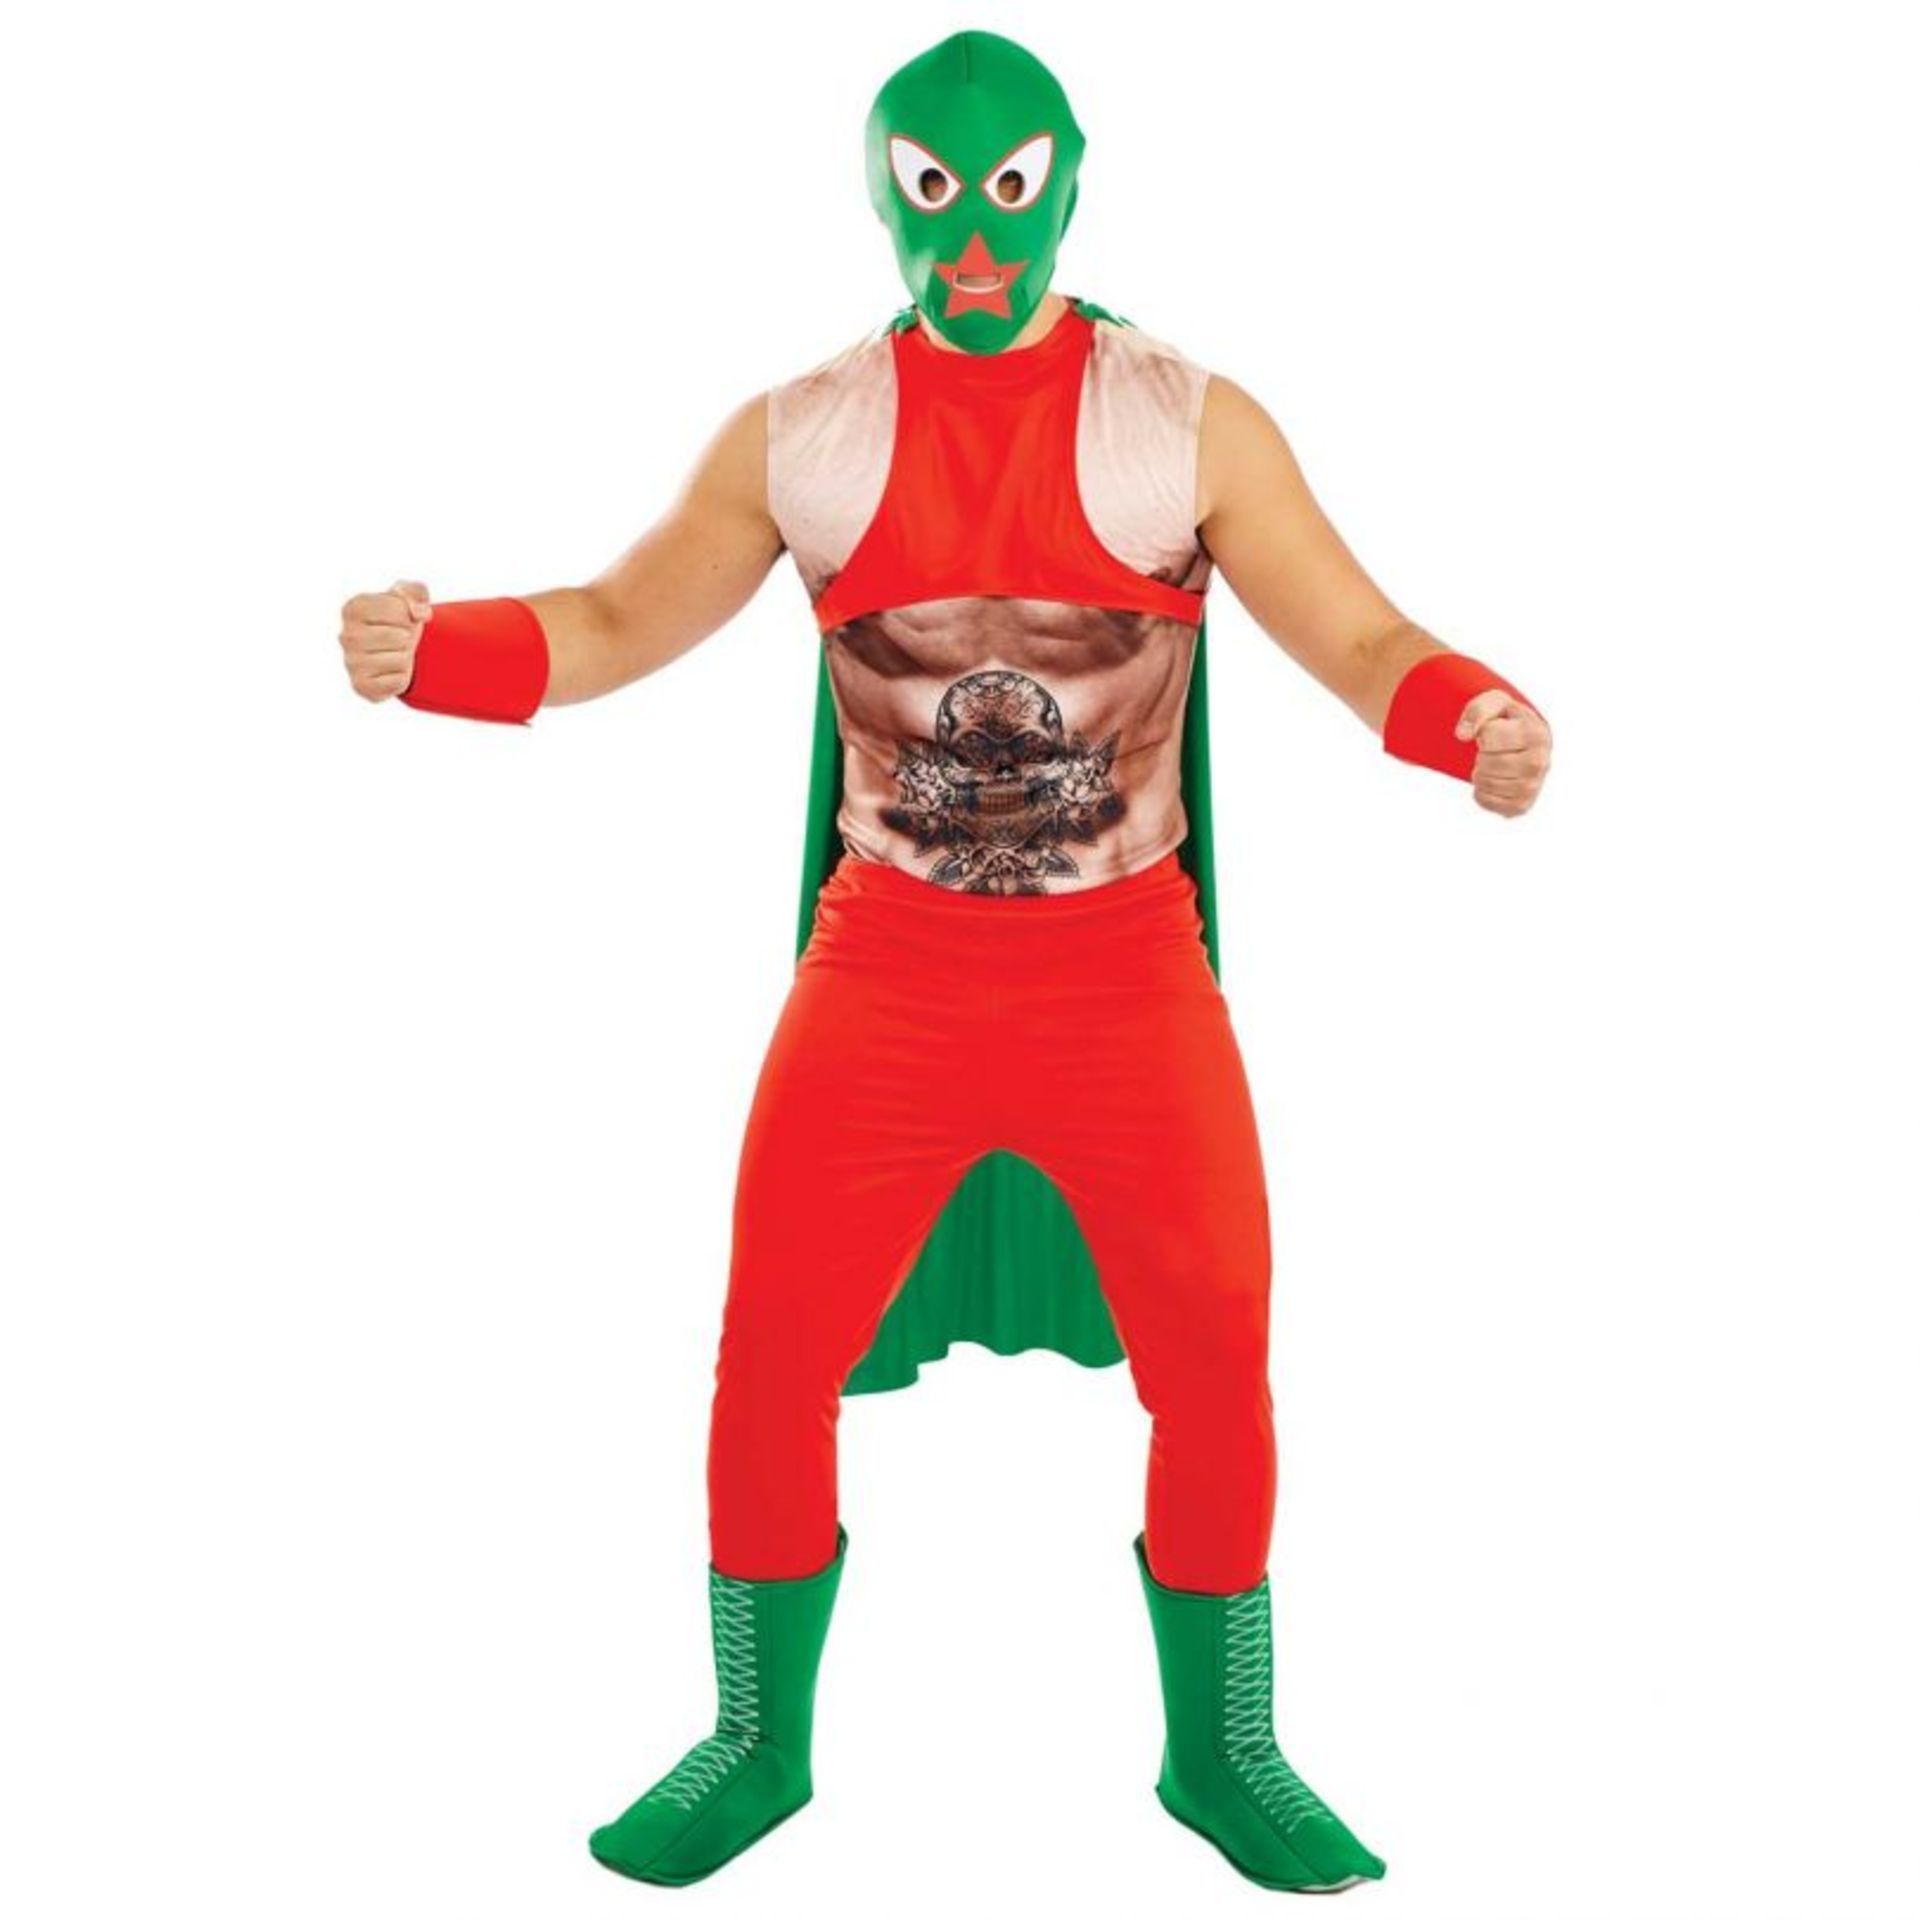 8 X BRAND NEW MORPHSUITS MEXICAN WRESTLER FANCY DRESS COSTUMES IN VARIOUS SIZES S1RA